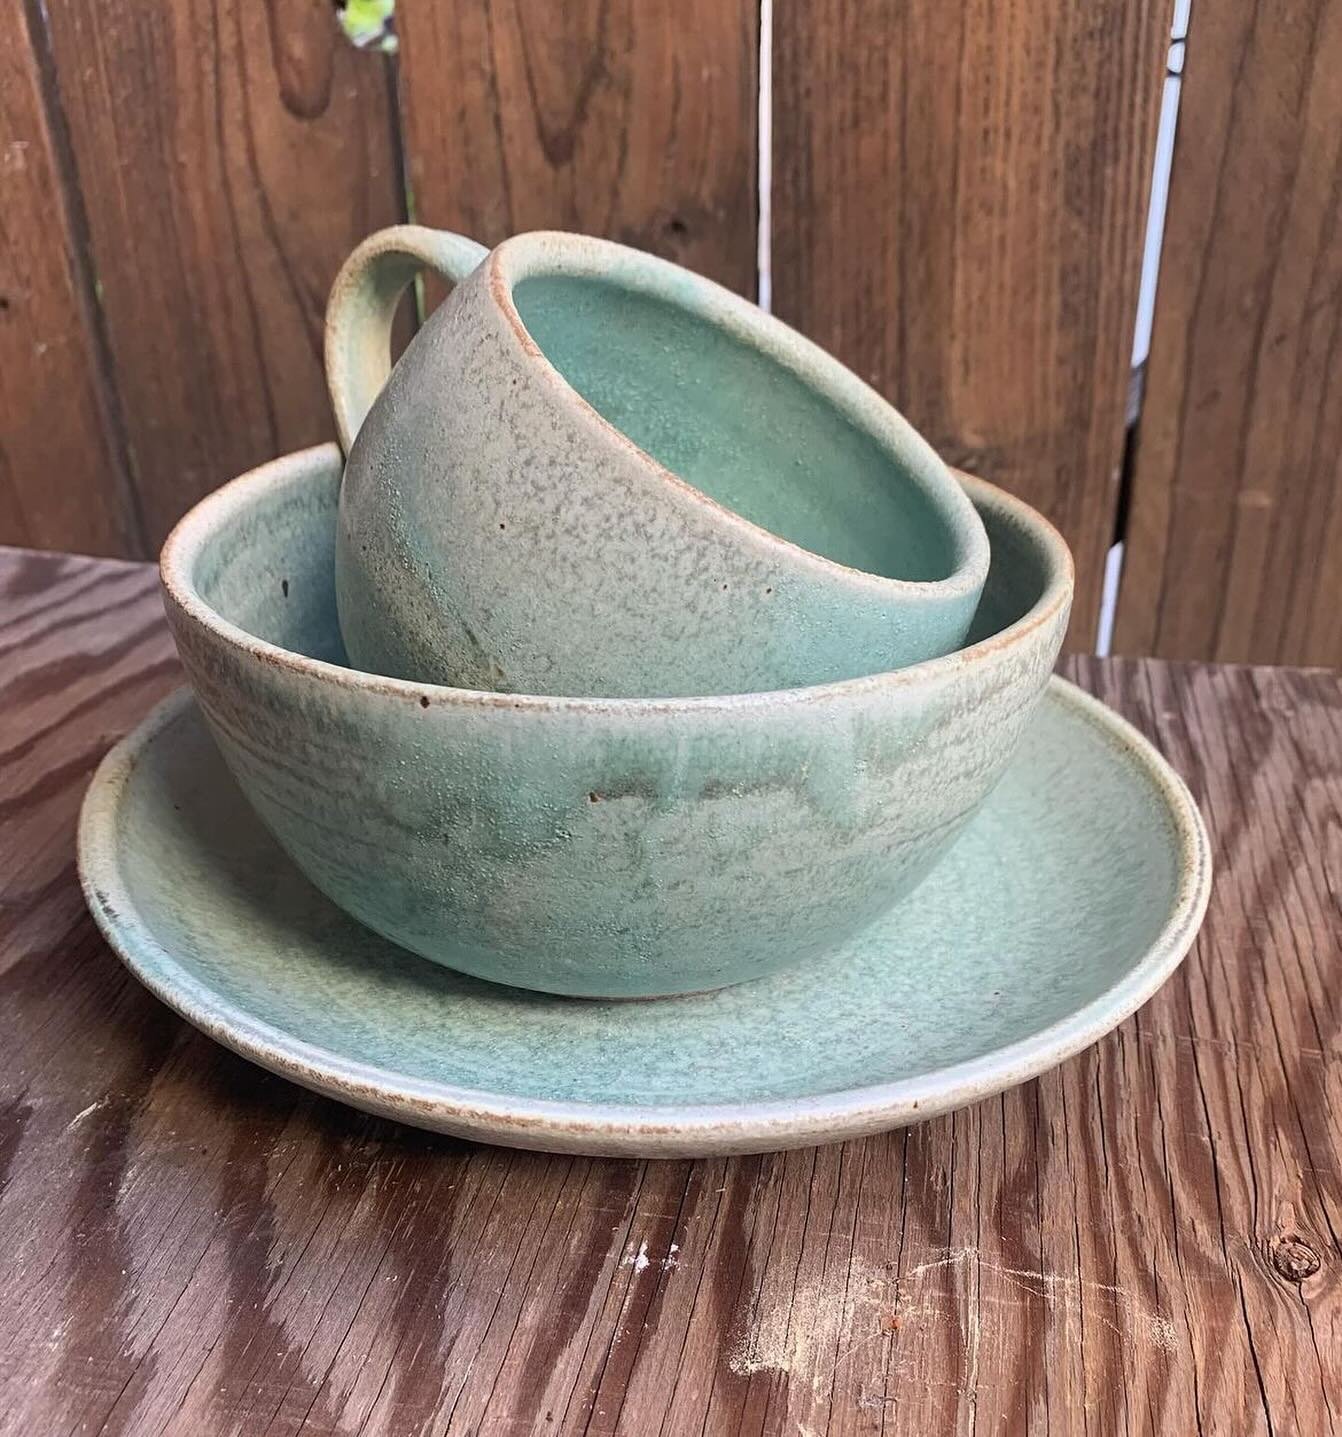 ☀️Join us this Saturday, May 11th, at Studio City&rsquo;s premier oasis @shopsatsportsmenslodge for a beautiful day of shopping small and shopping local this spring.

From 10am-4pm we&rsquo;ll be joined by none other than @betseycarterceramics @wuitu